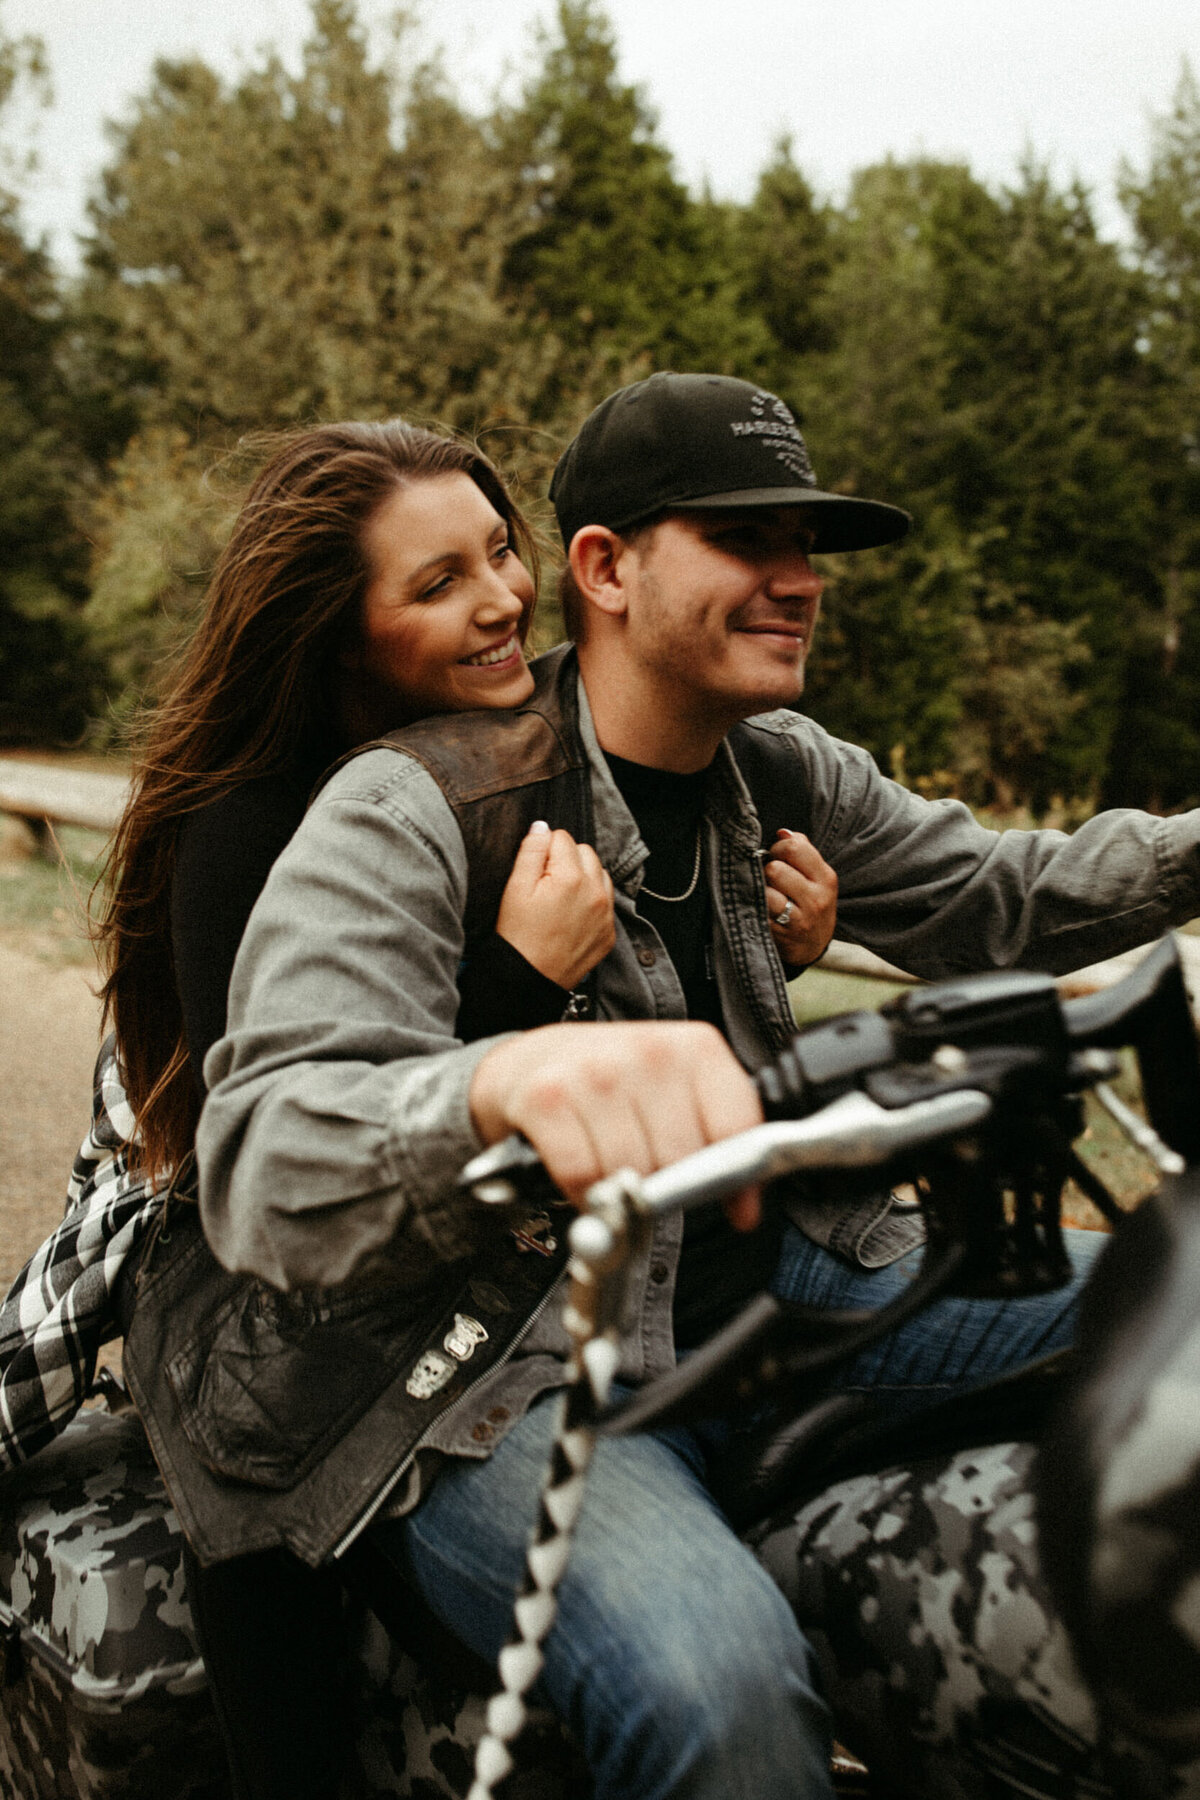 Girl holding onto guy wearing biker jacket as they ride a motorcycle down the road